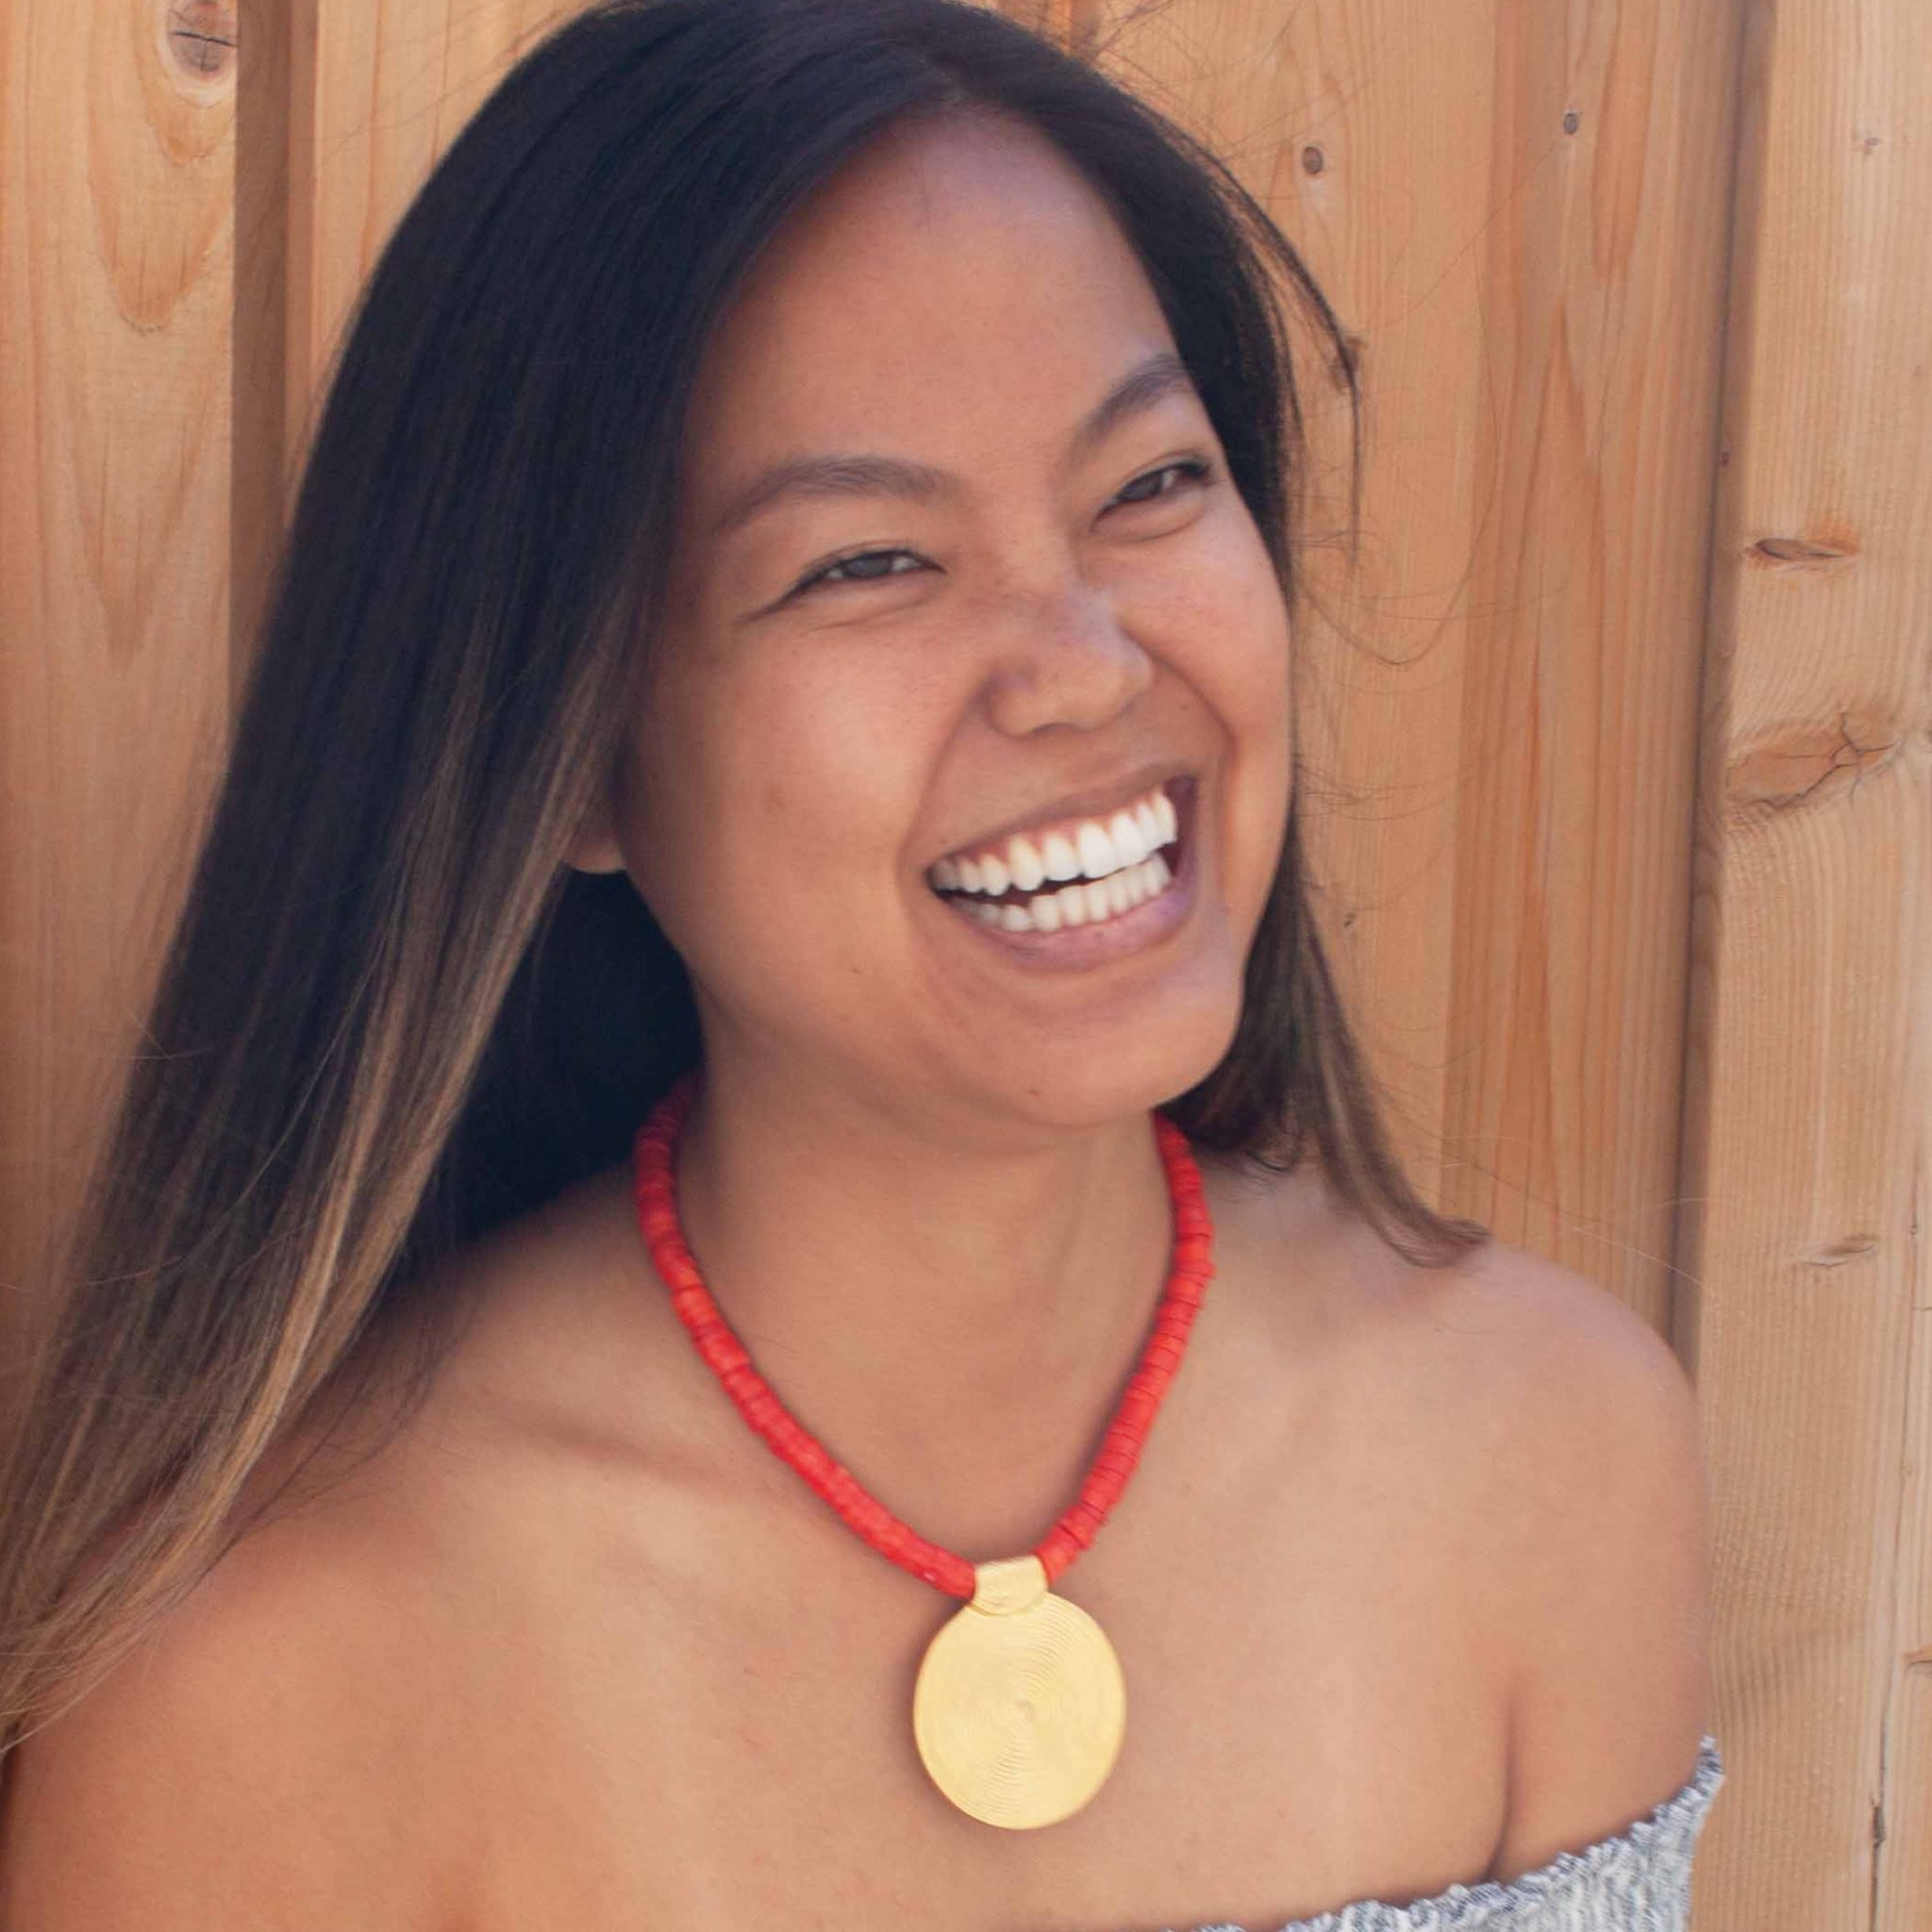 Make a bright and beautiful statement this summer with this eye catching neck candy! 16 inch (adjustable) synthetic* sea bamboo necklace with gold plated spiral pendant. Handmade in Toronto by kp jewelry co.  *synthetic sea bamboo contributes to the protection of the endangered bamboo coral species.